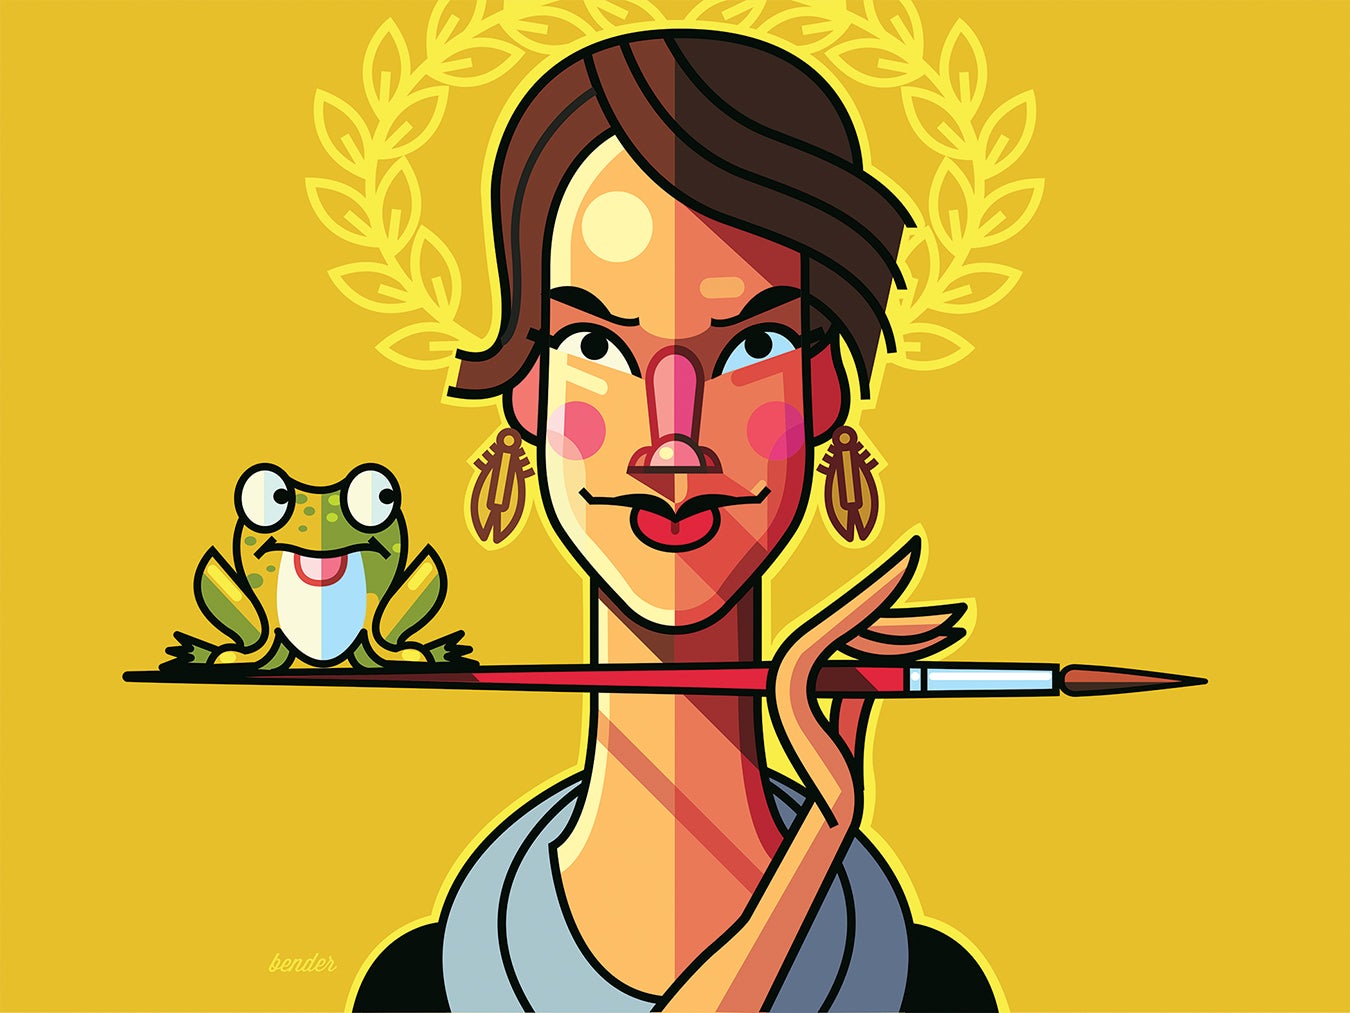 Illustration of Ashley Cecil holding a paintbrush horizontally with a frog sitting on the edge of the brush.